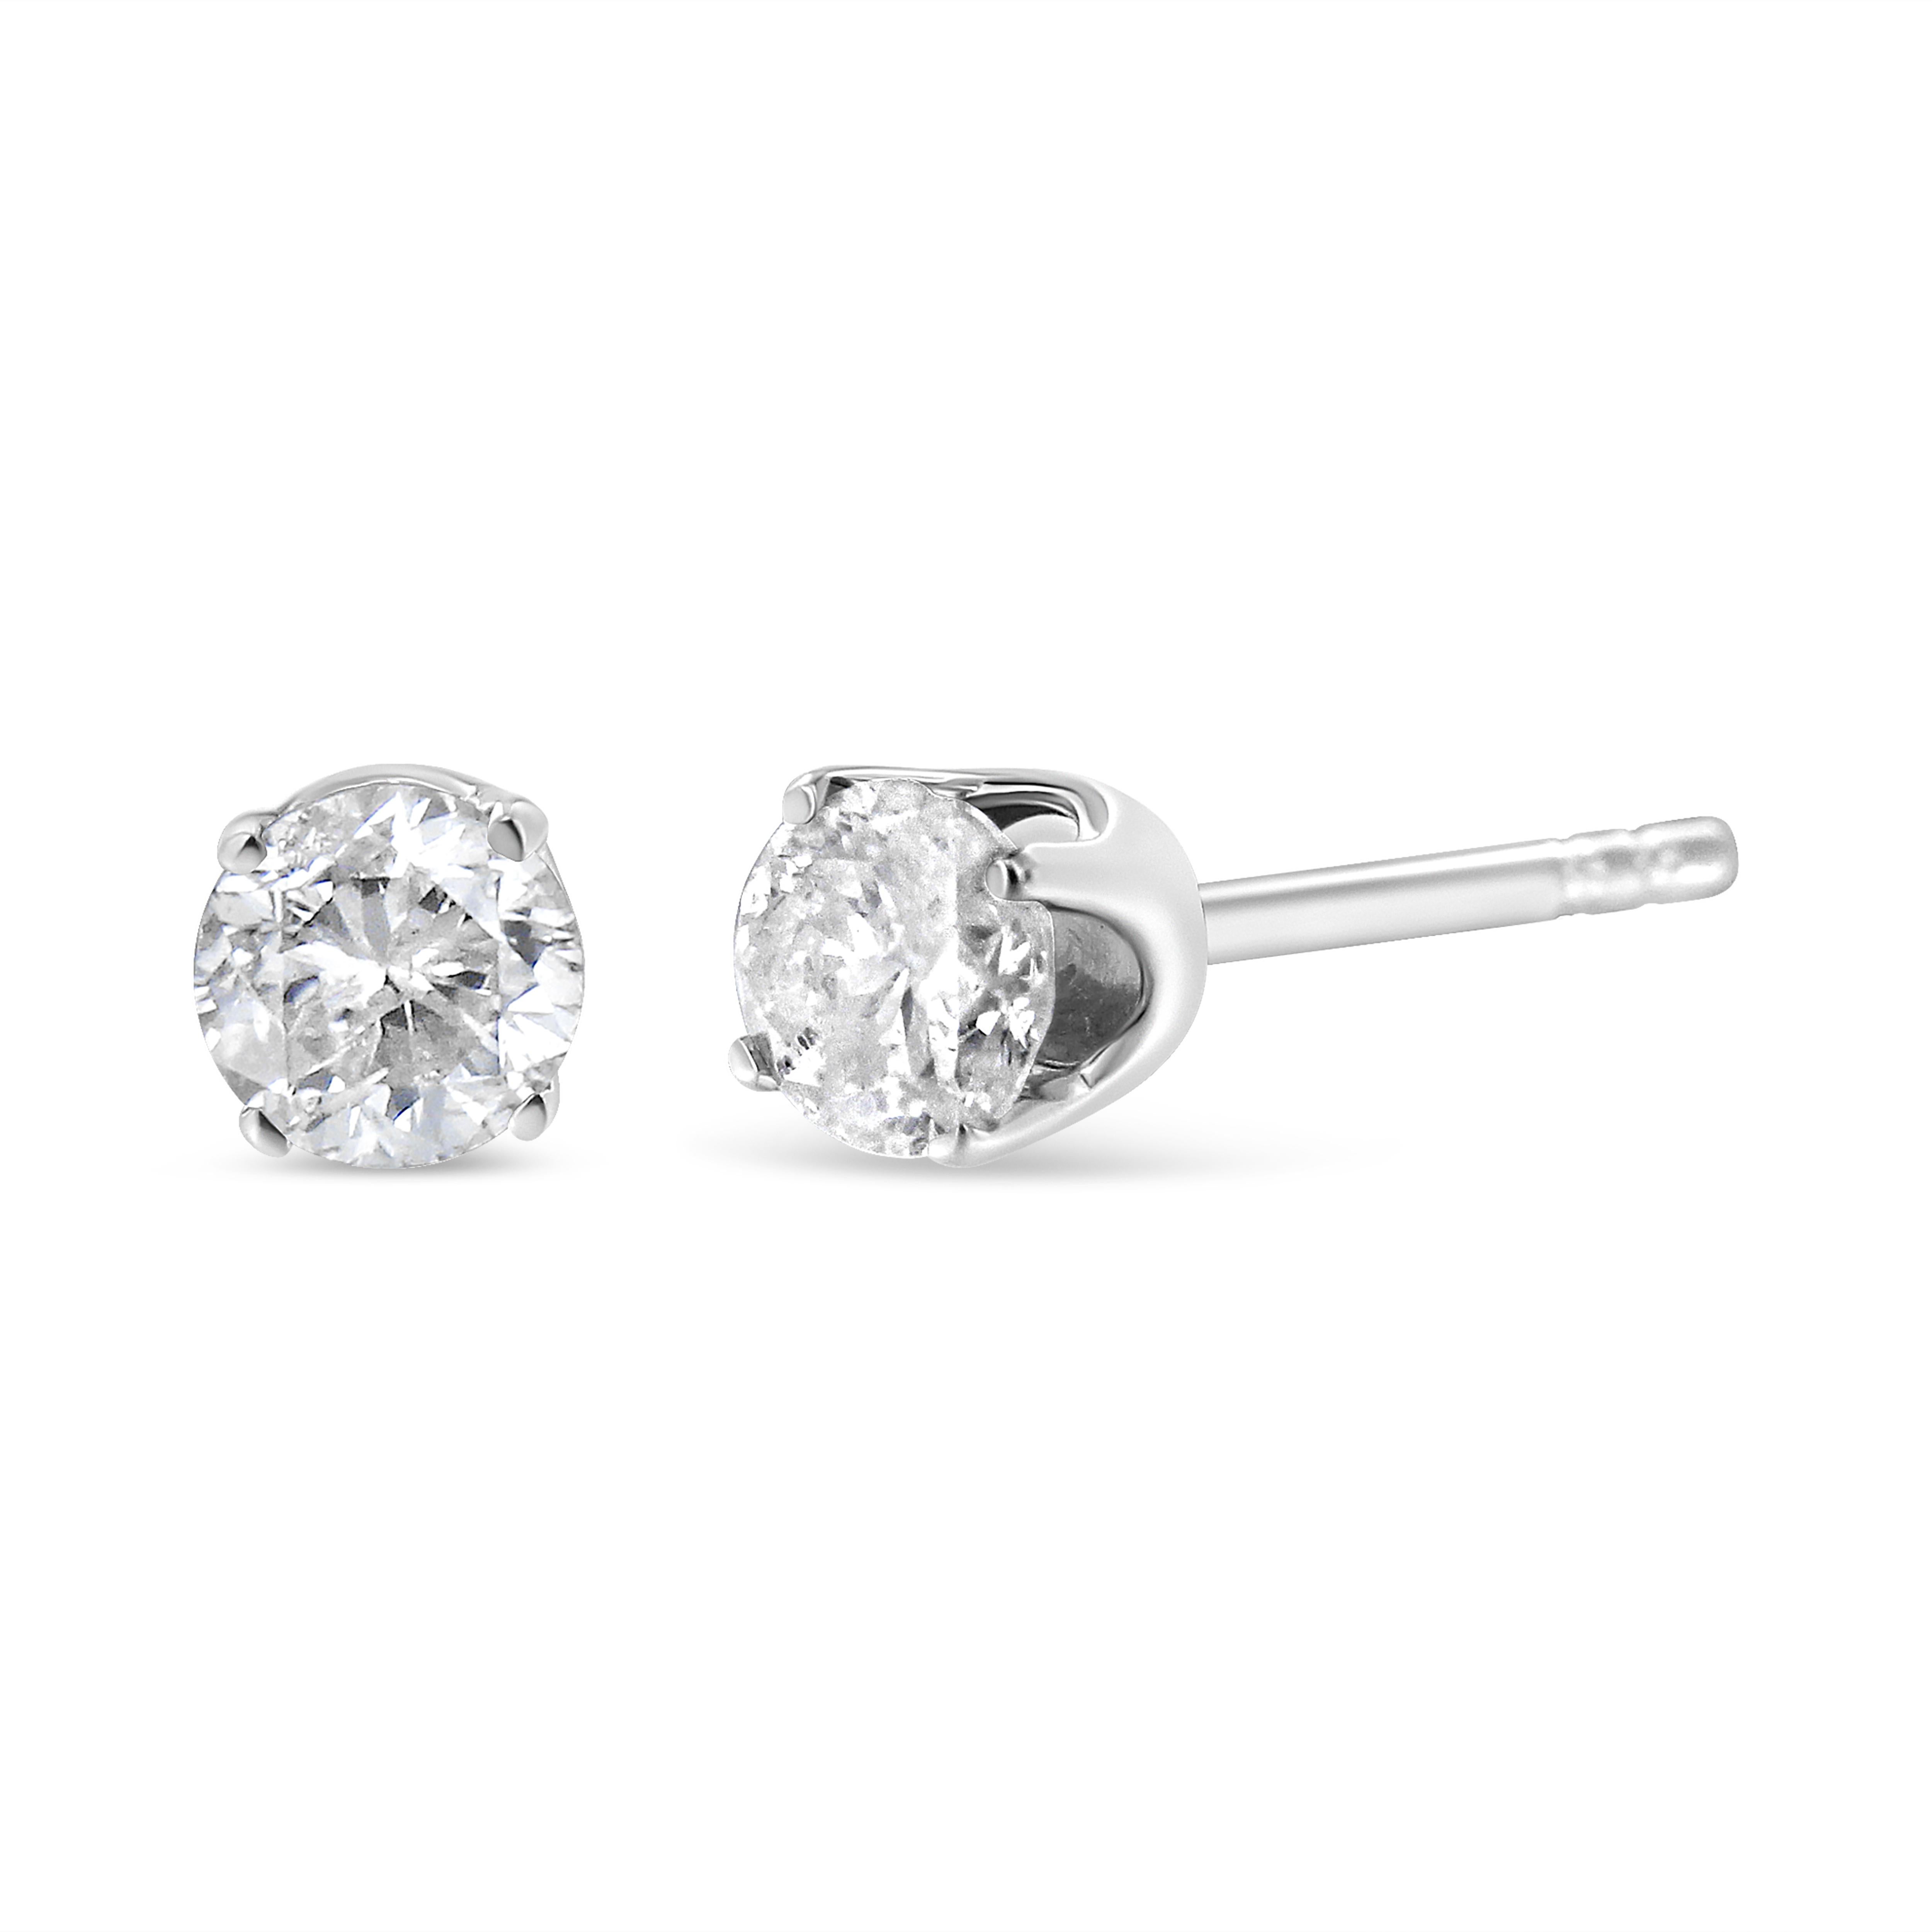 Frame her face with the bold and impressive look of these fabulous round cut diamond stud earrings. Crafted in 14K white gold, each earring features a mesmerizing 0.165 ct. diamond solitaire in a four-prong setting. Captivating with 0.33 ct tdw of